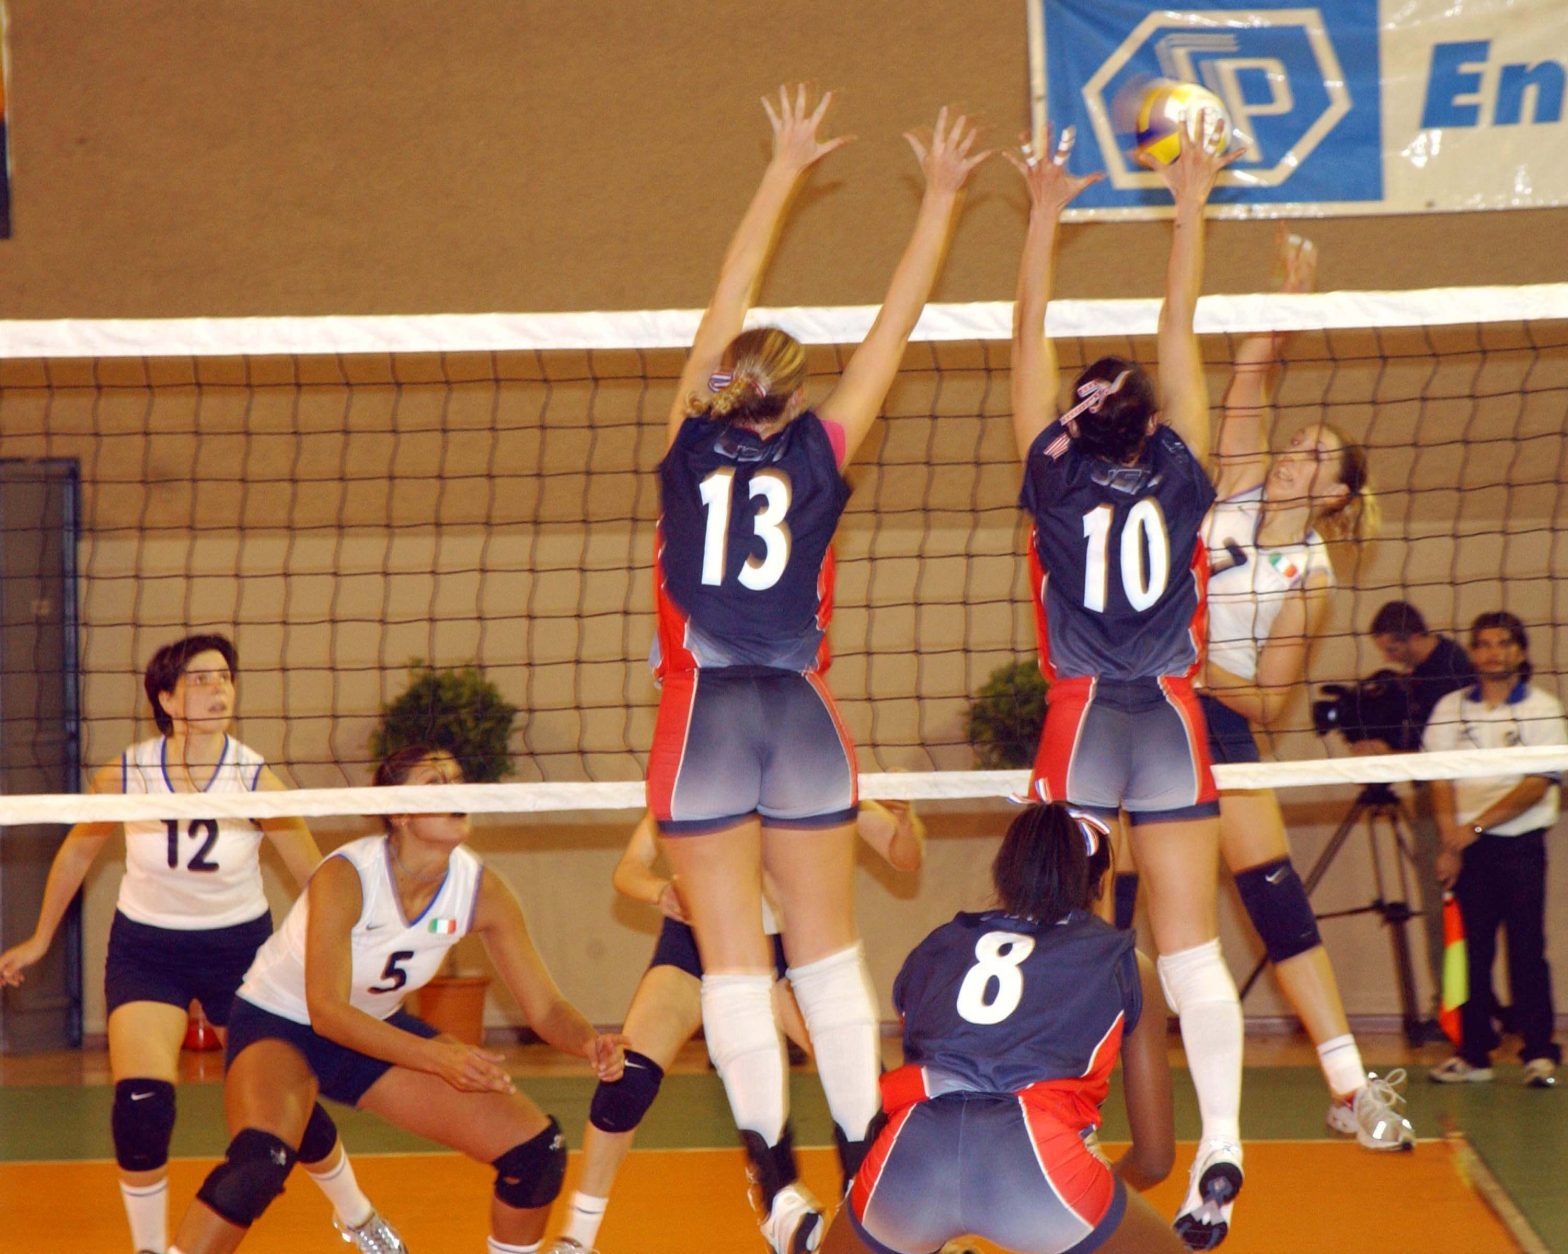 A group of women playing volleyball on a court.